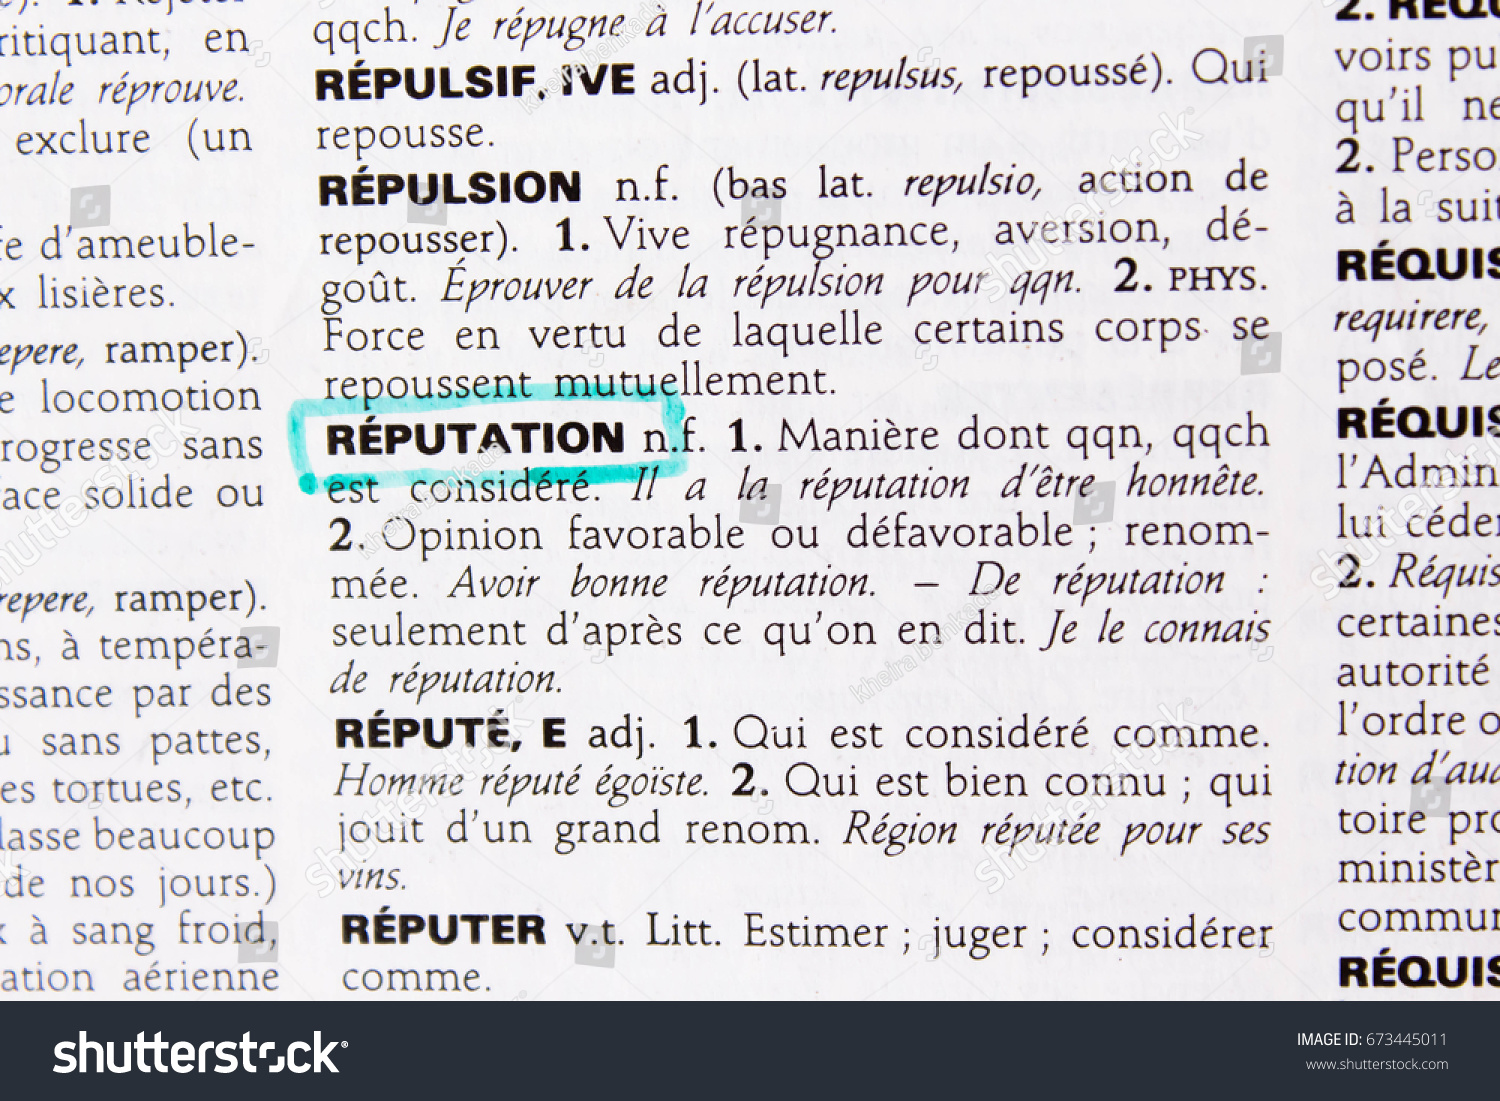 definition reputation dictionary stock photo (edit now) 673445011